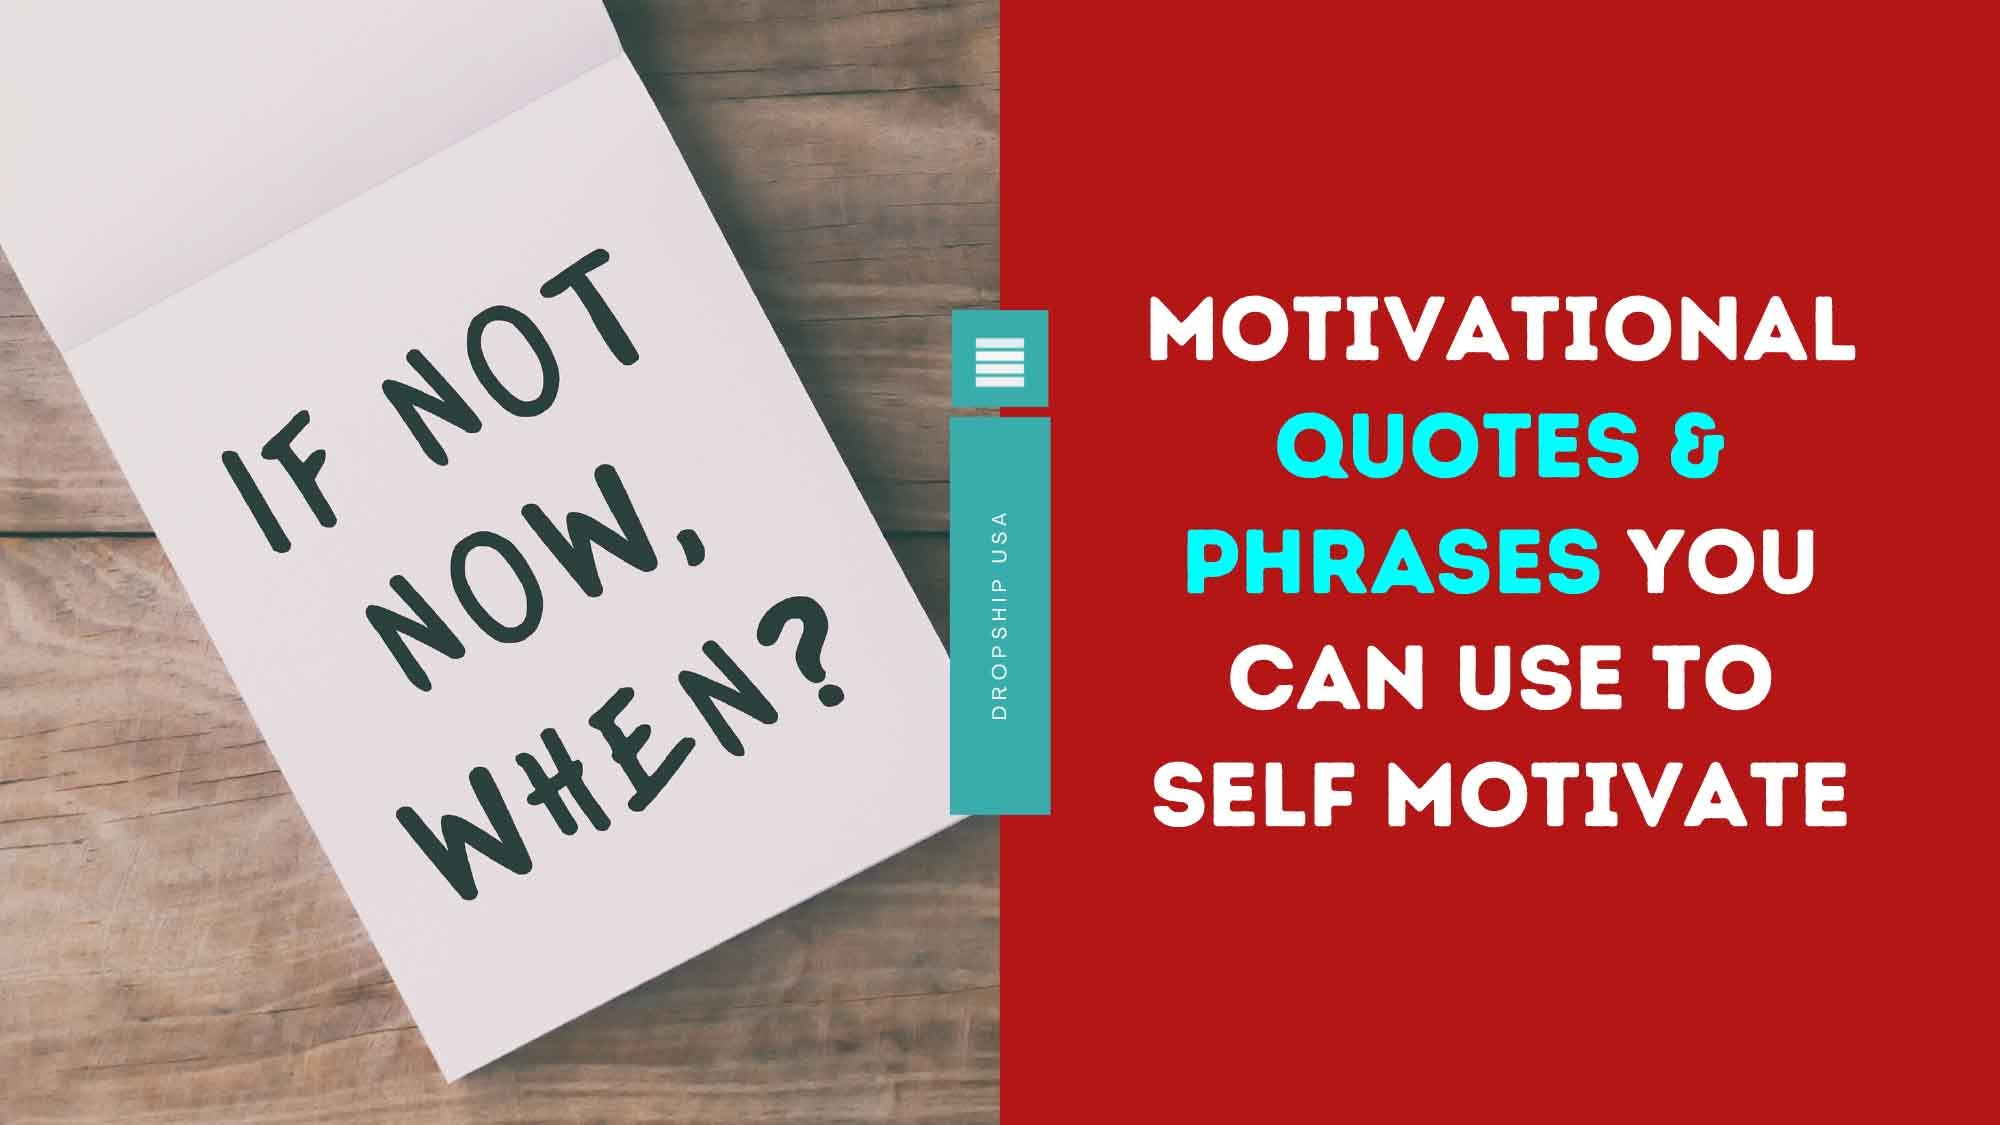 Motivational Quotes & Phrases You Can Use To Self Motivate